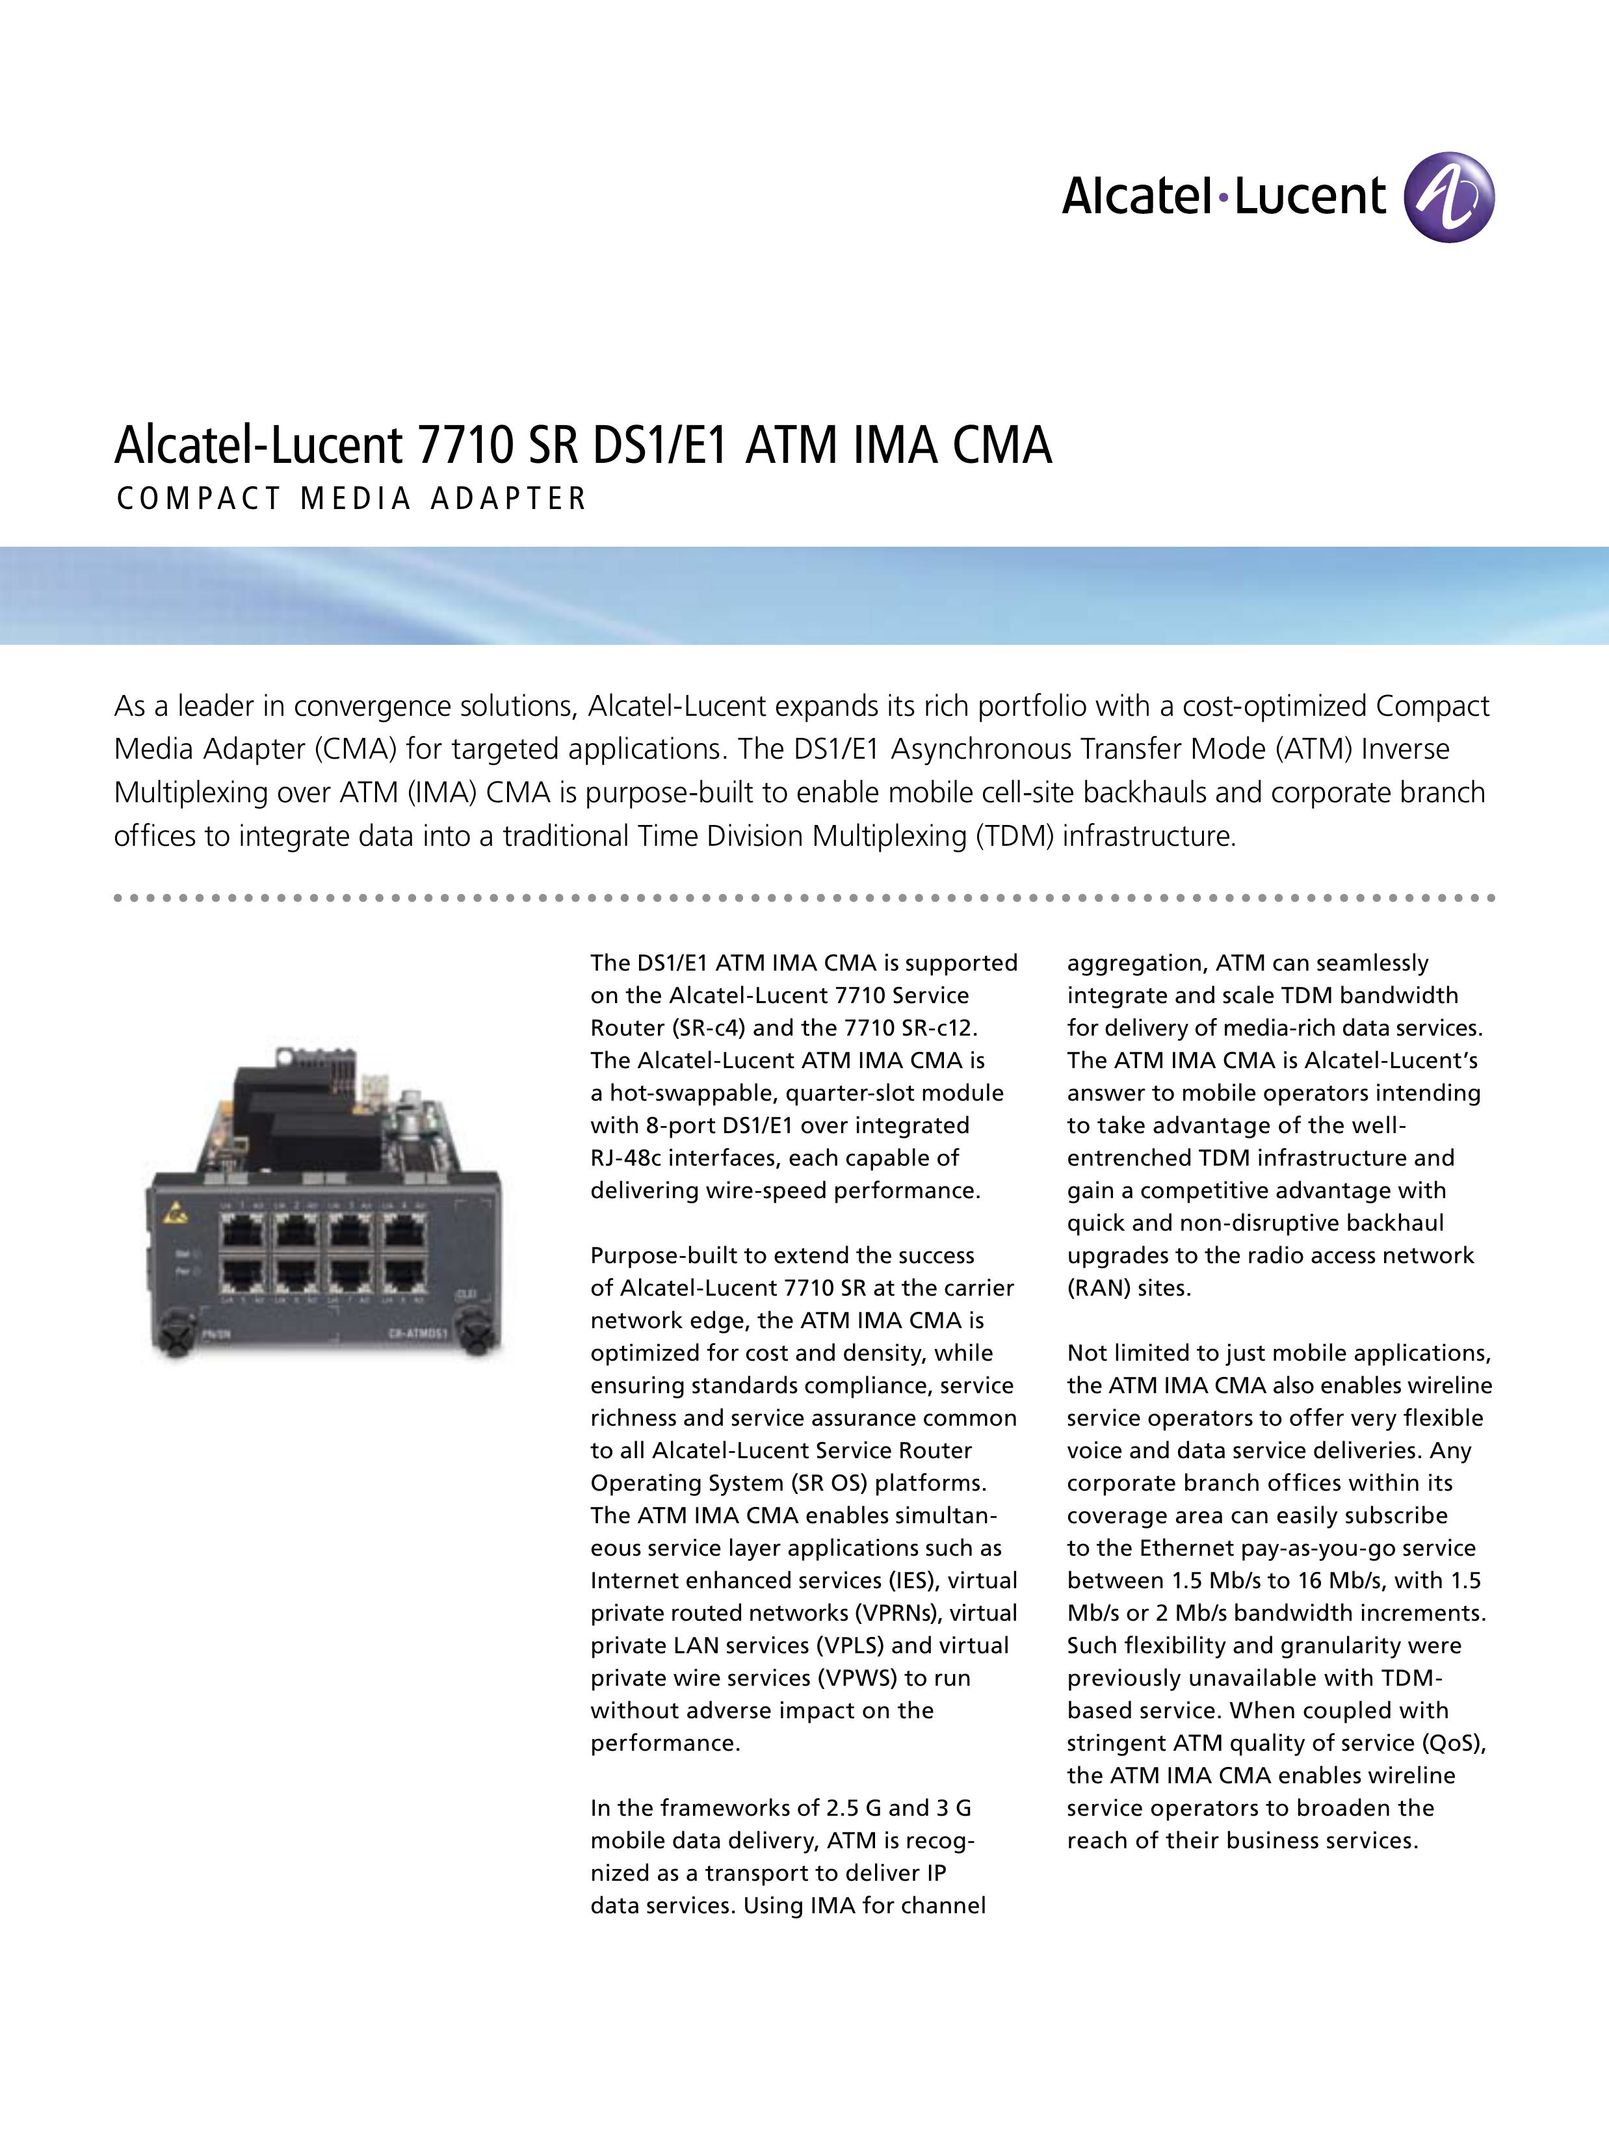 Alcatel-Lucent 7710 SR DS1 Network Card User Manual